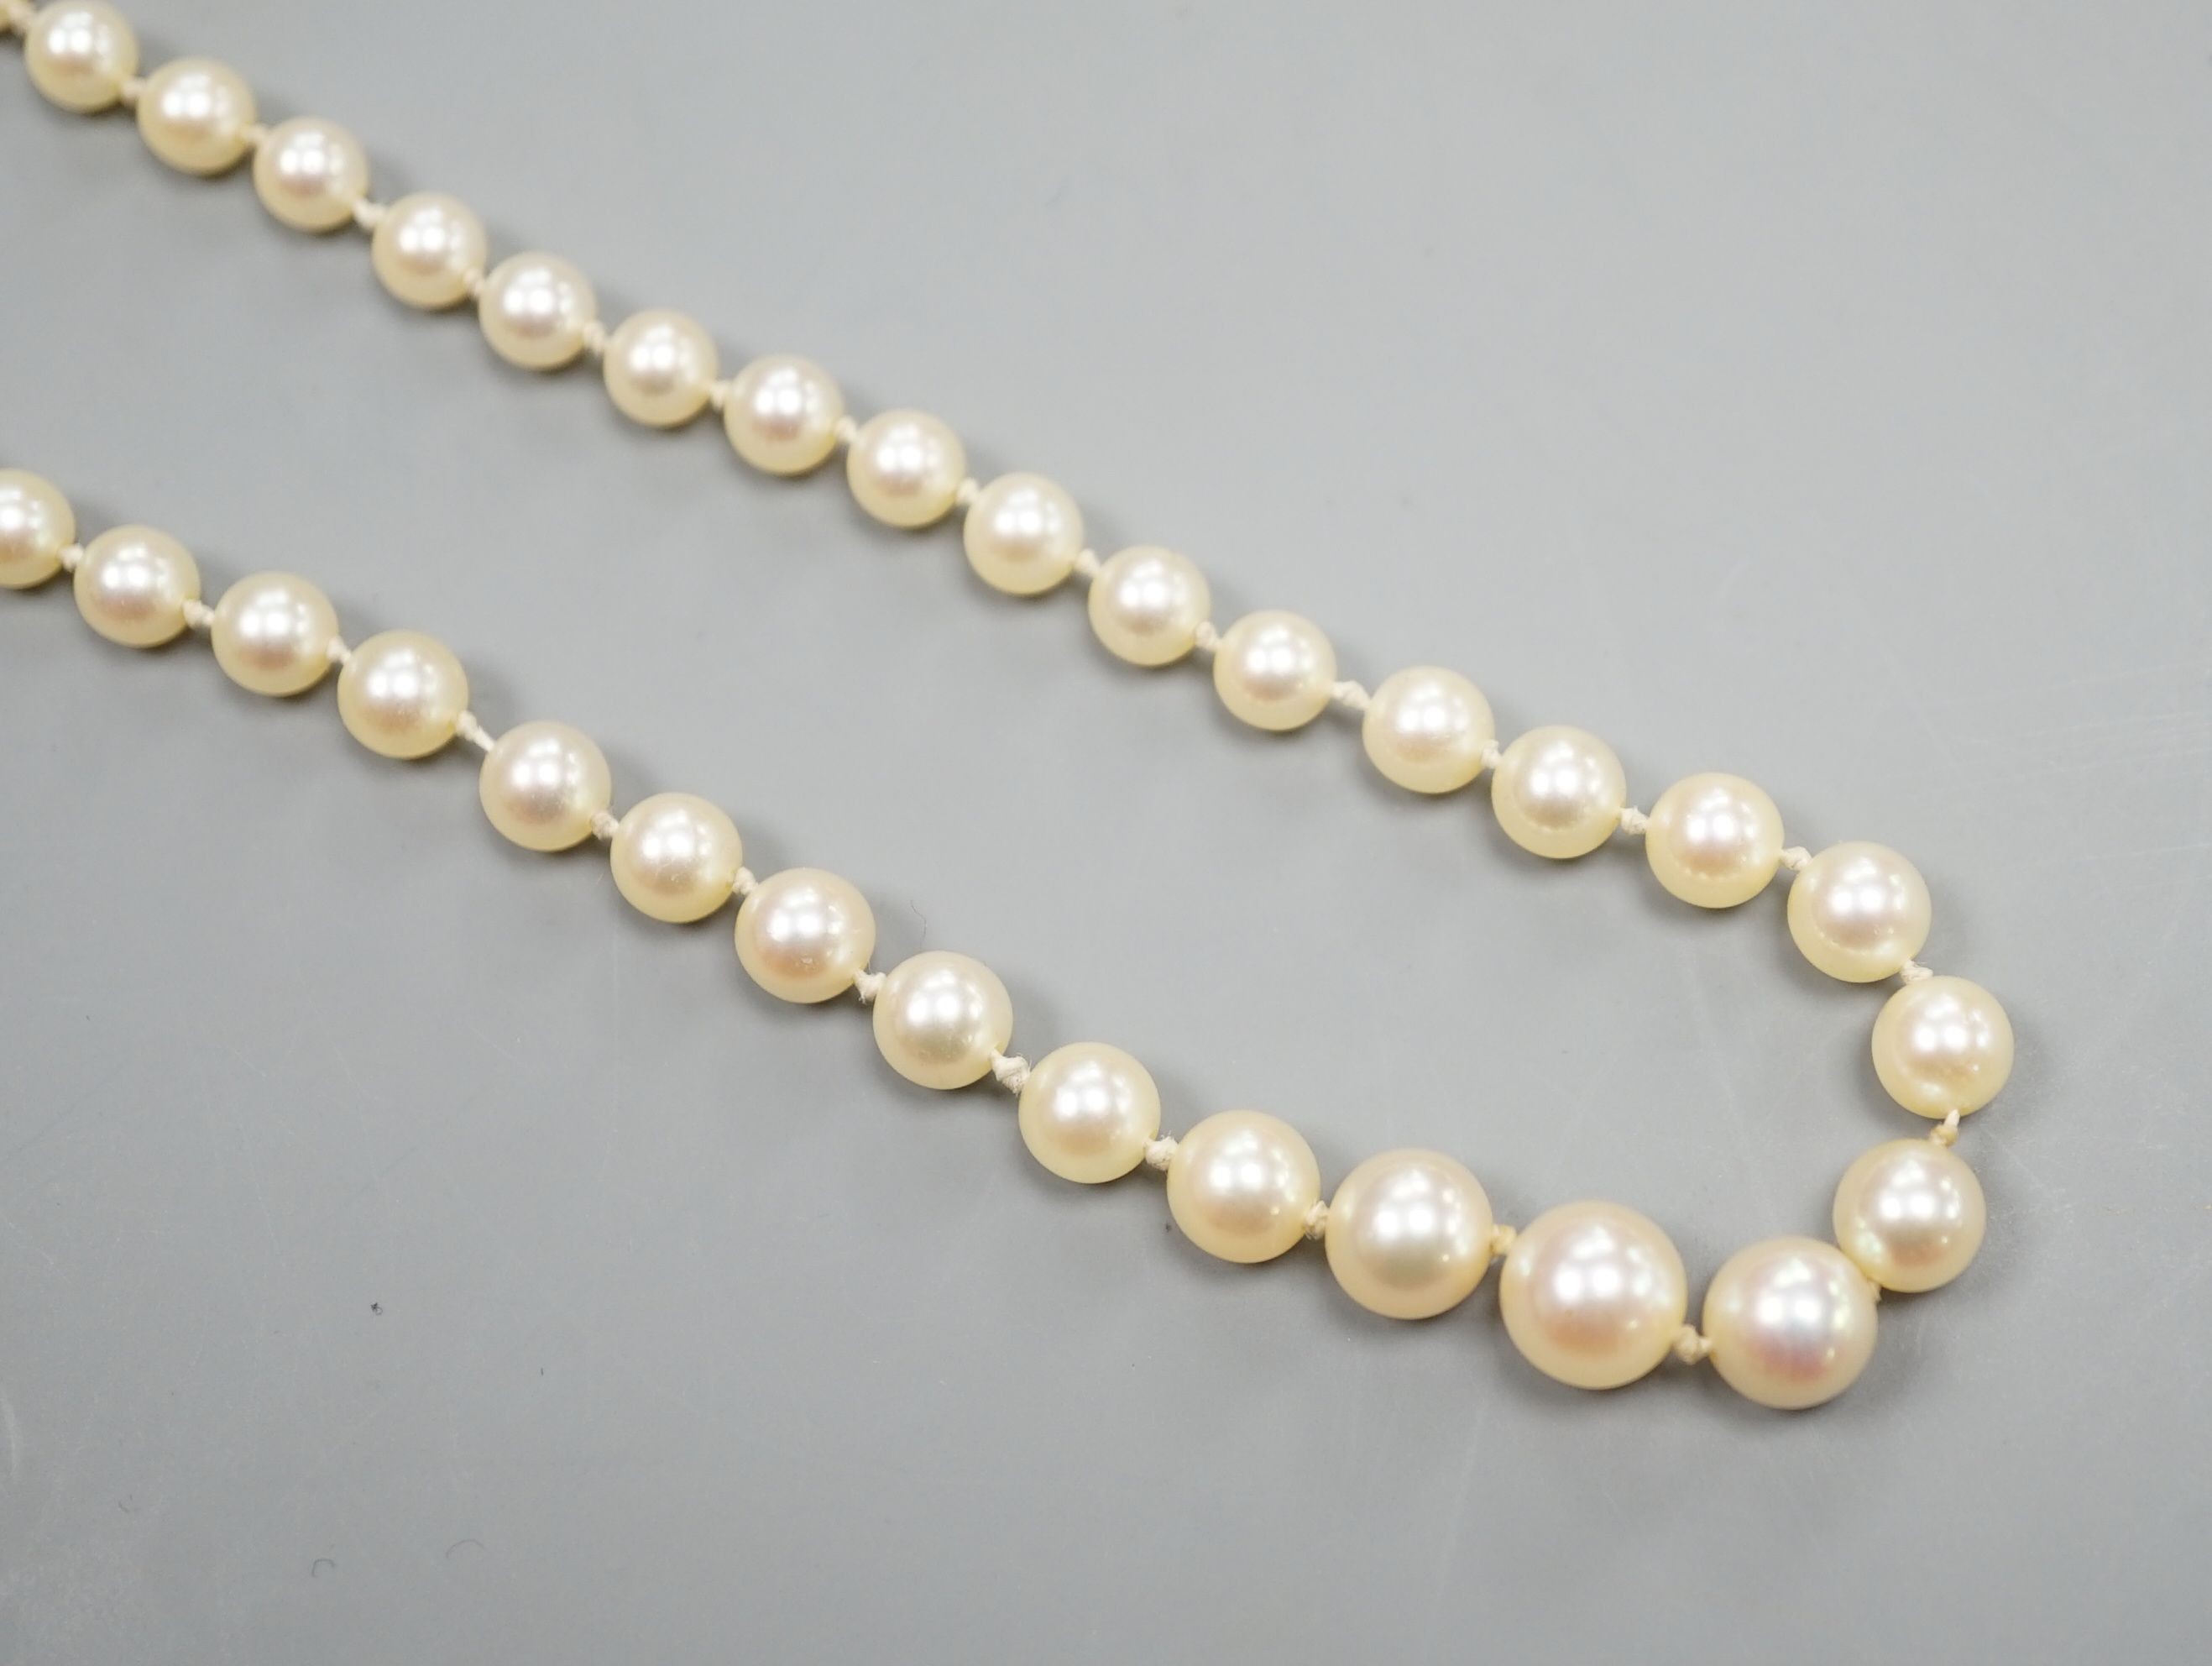 A single strand graduated cultured pearl necklace, with four stone diamond set white metal clasp, 50cm, gross weight 14.4 grams (pearls have not been tested).